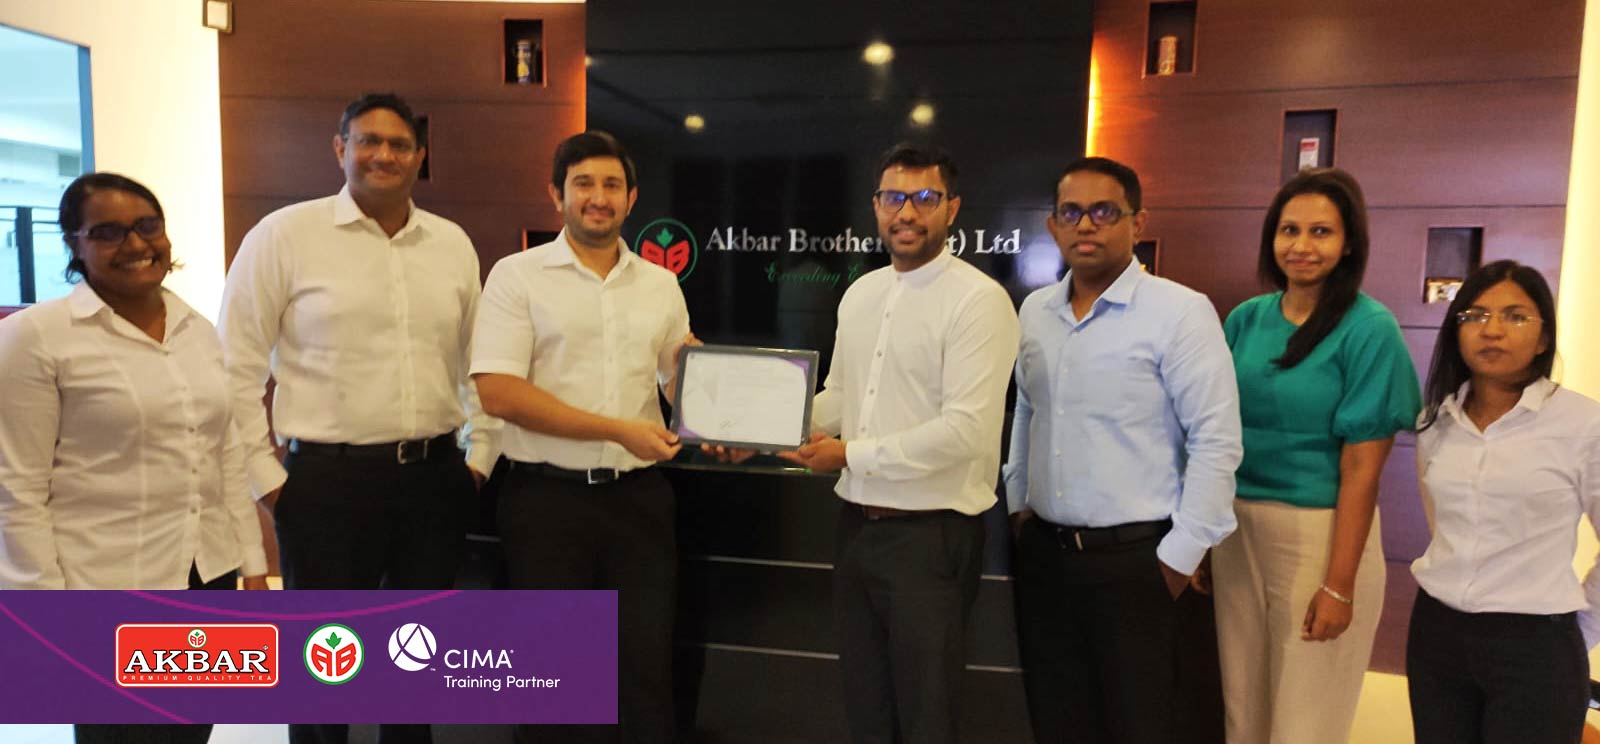 Akbar Brothers recognized with Asia Pacific Employer Status by CIMA